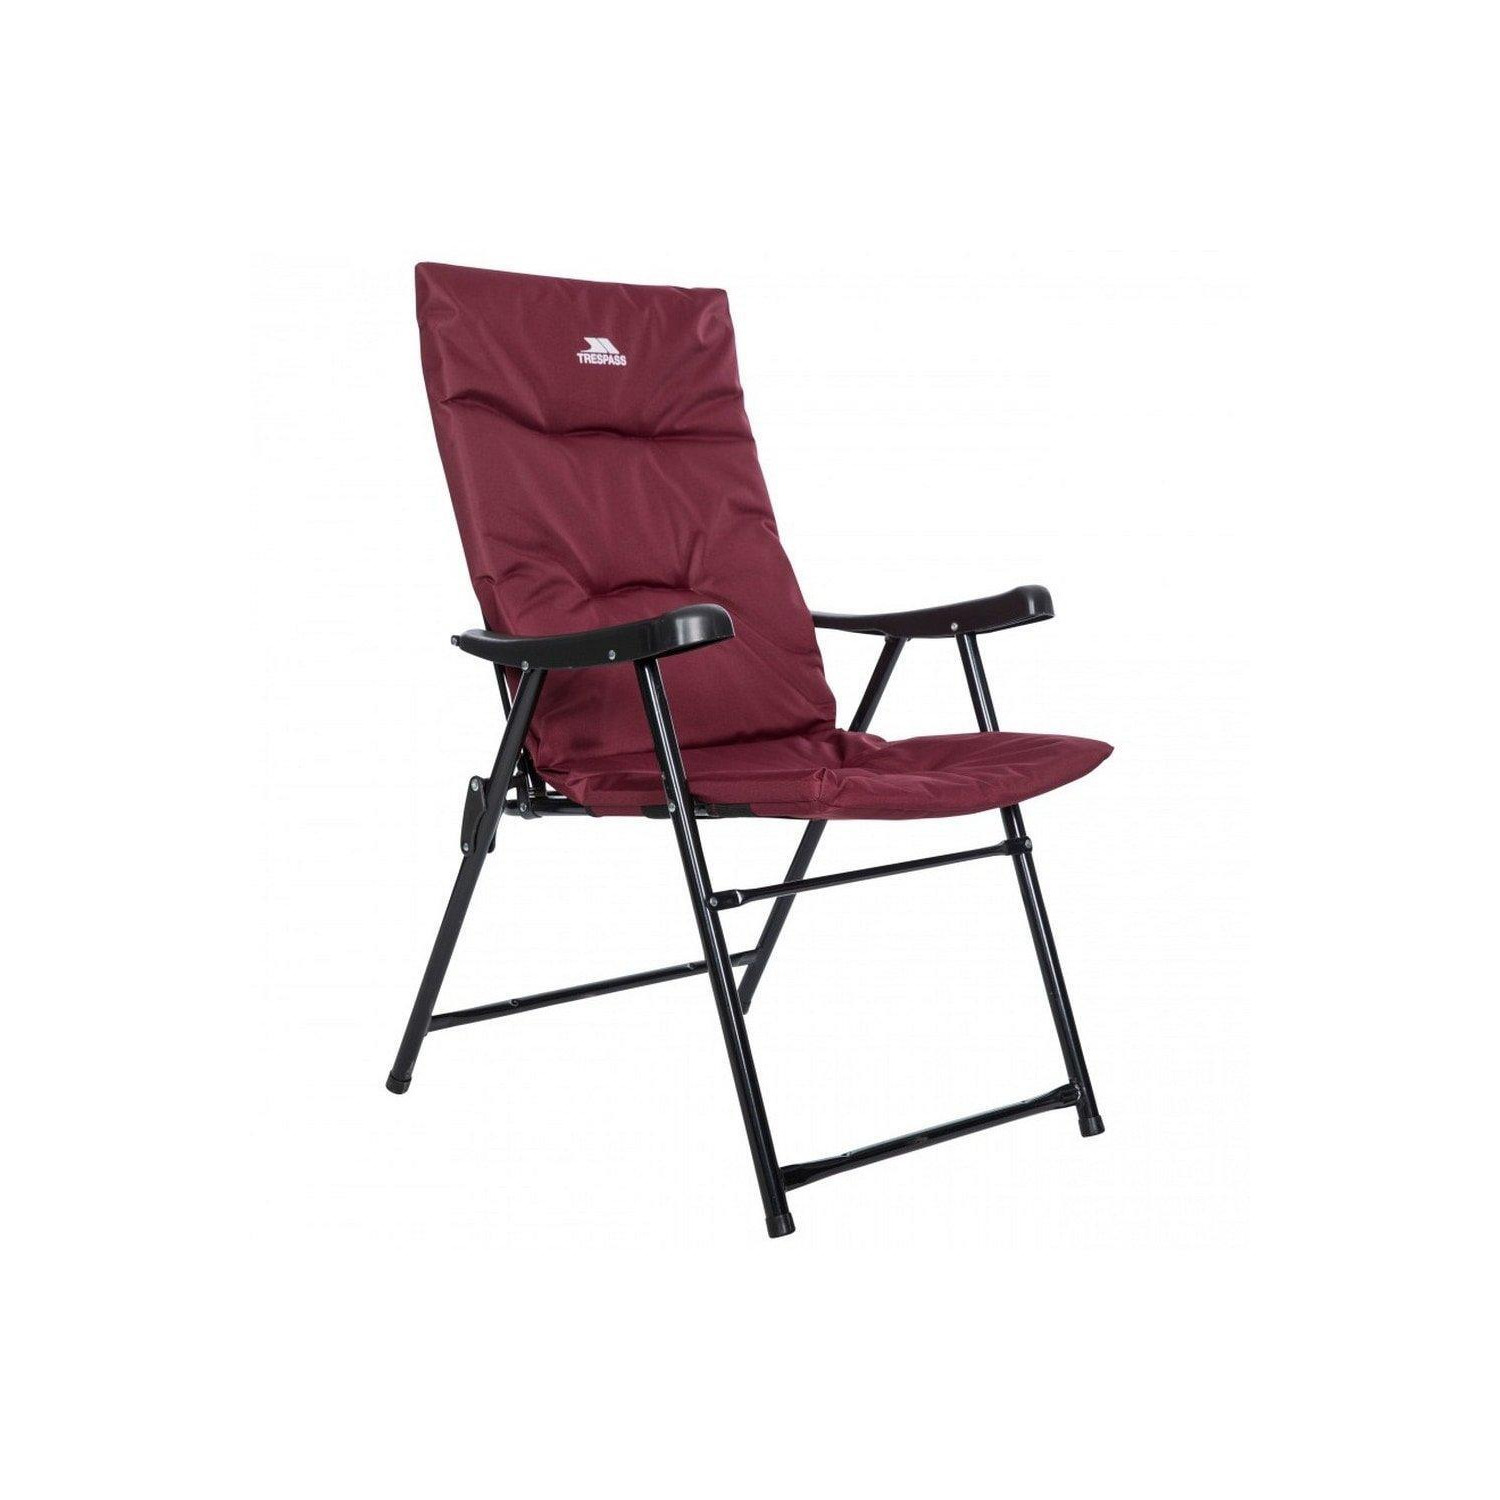 Paddy Folding Padded Deck Chair - image 1